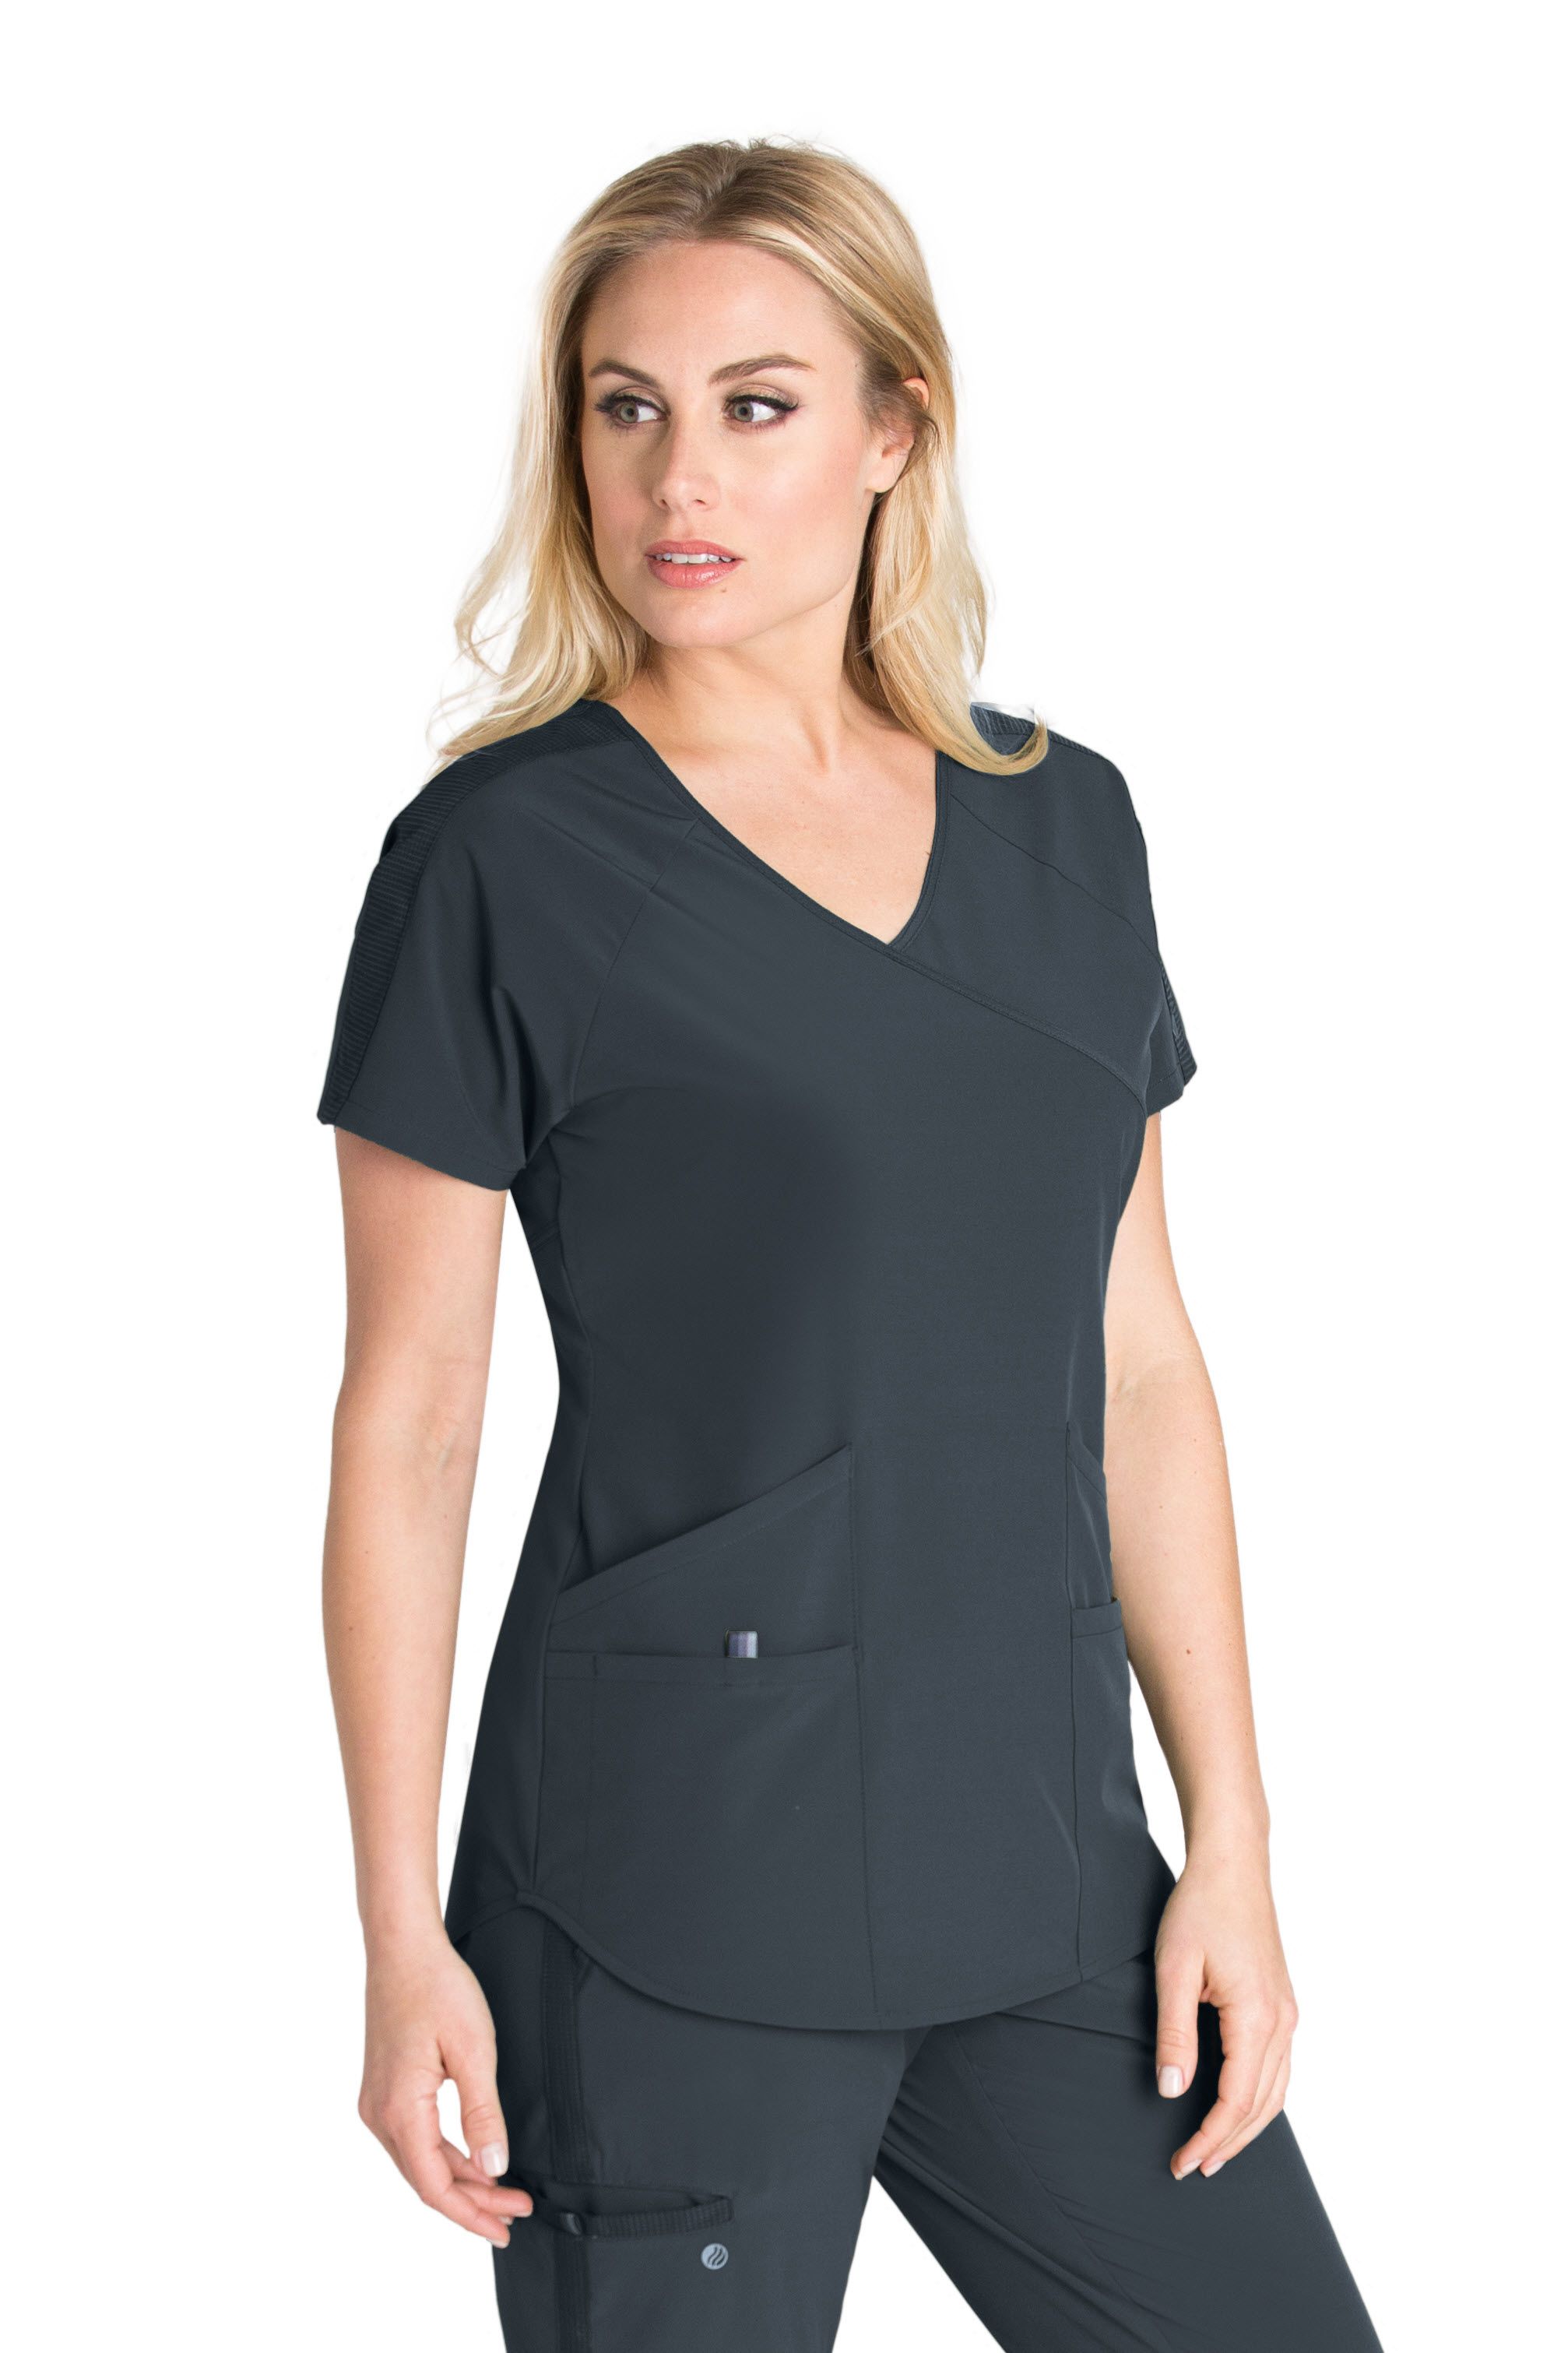 Buy Barco One 4 Pocket Scrub Top - Barco Wellness Online at Best price - NE